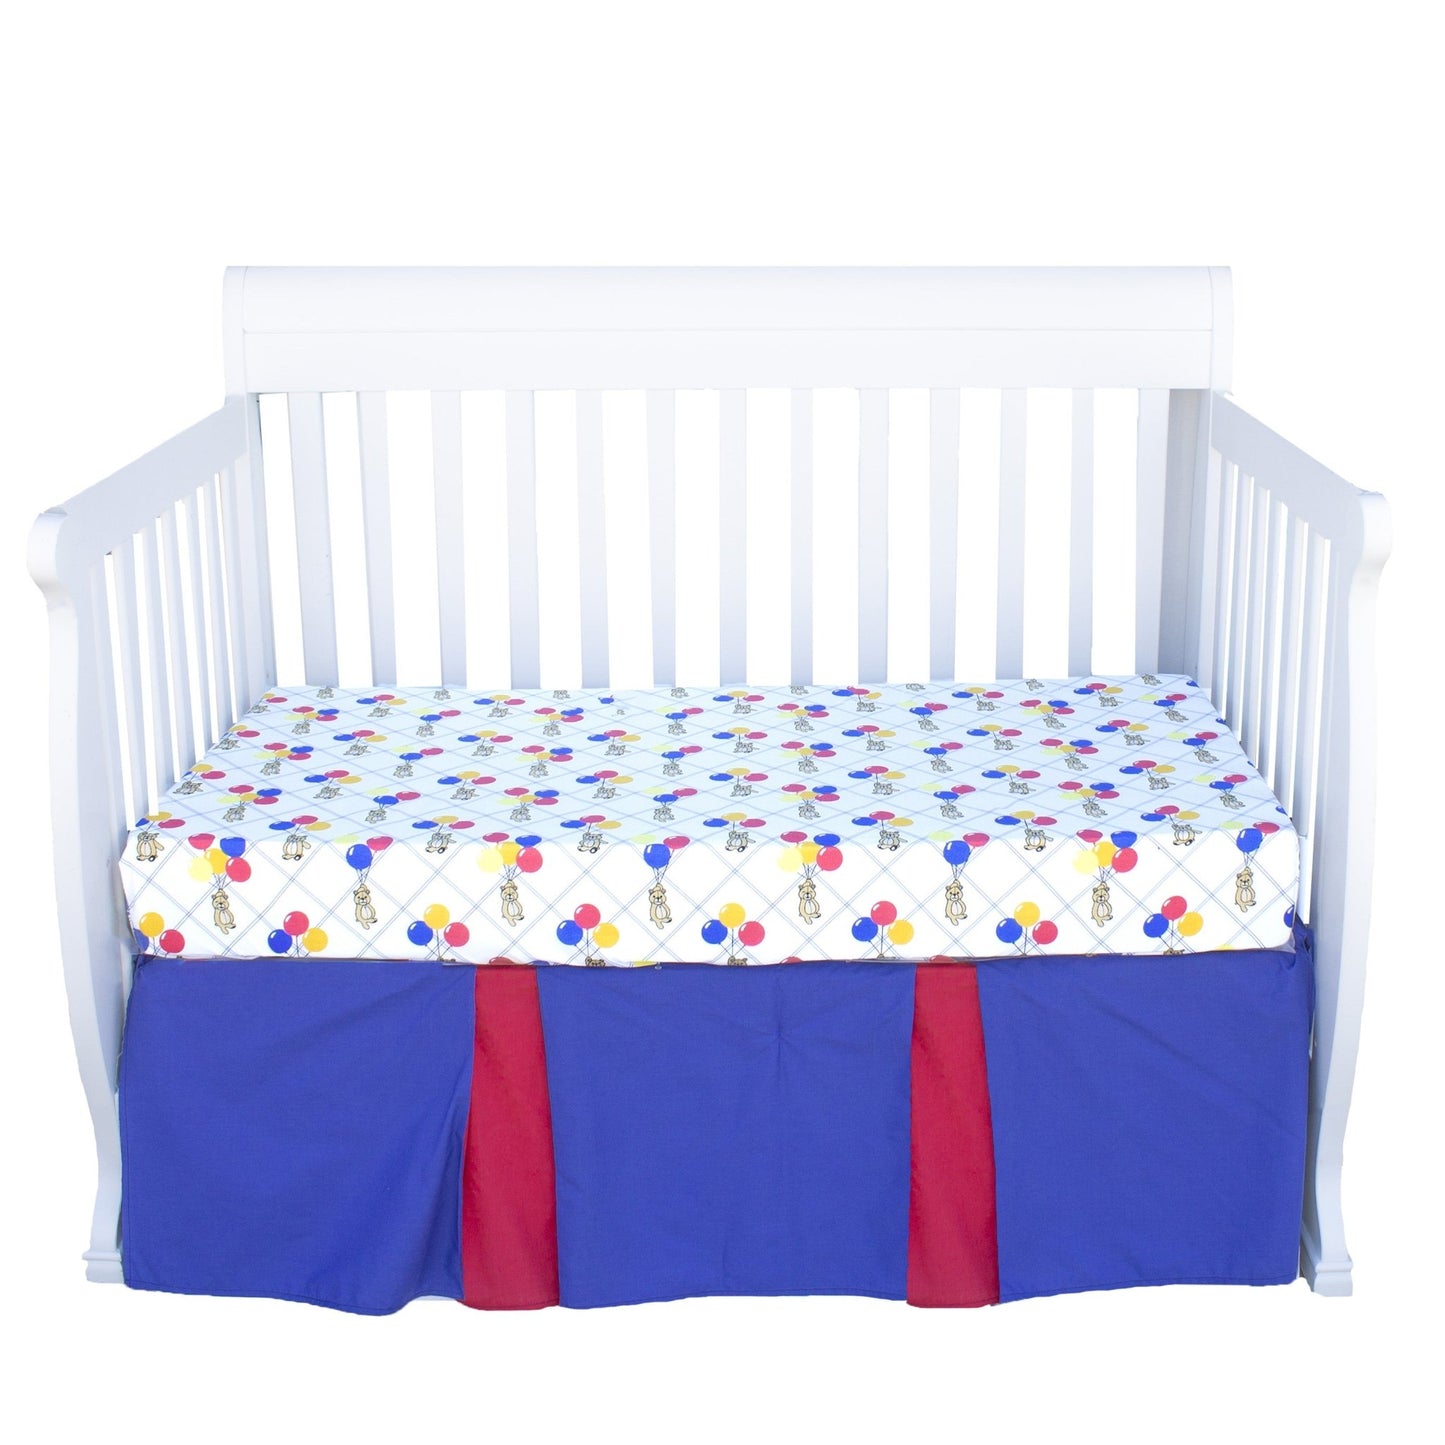 Bears and Balloons 3 Piece Crib Bedding Set - New Arrivals Inc